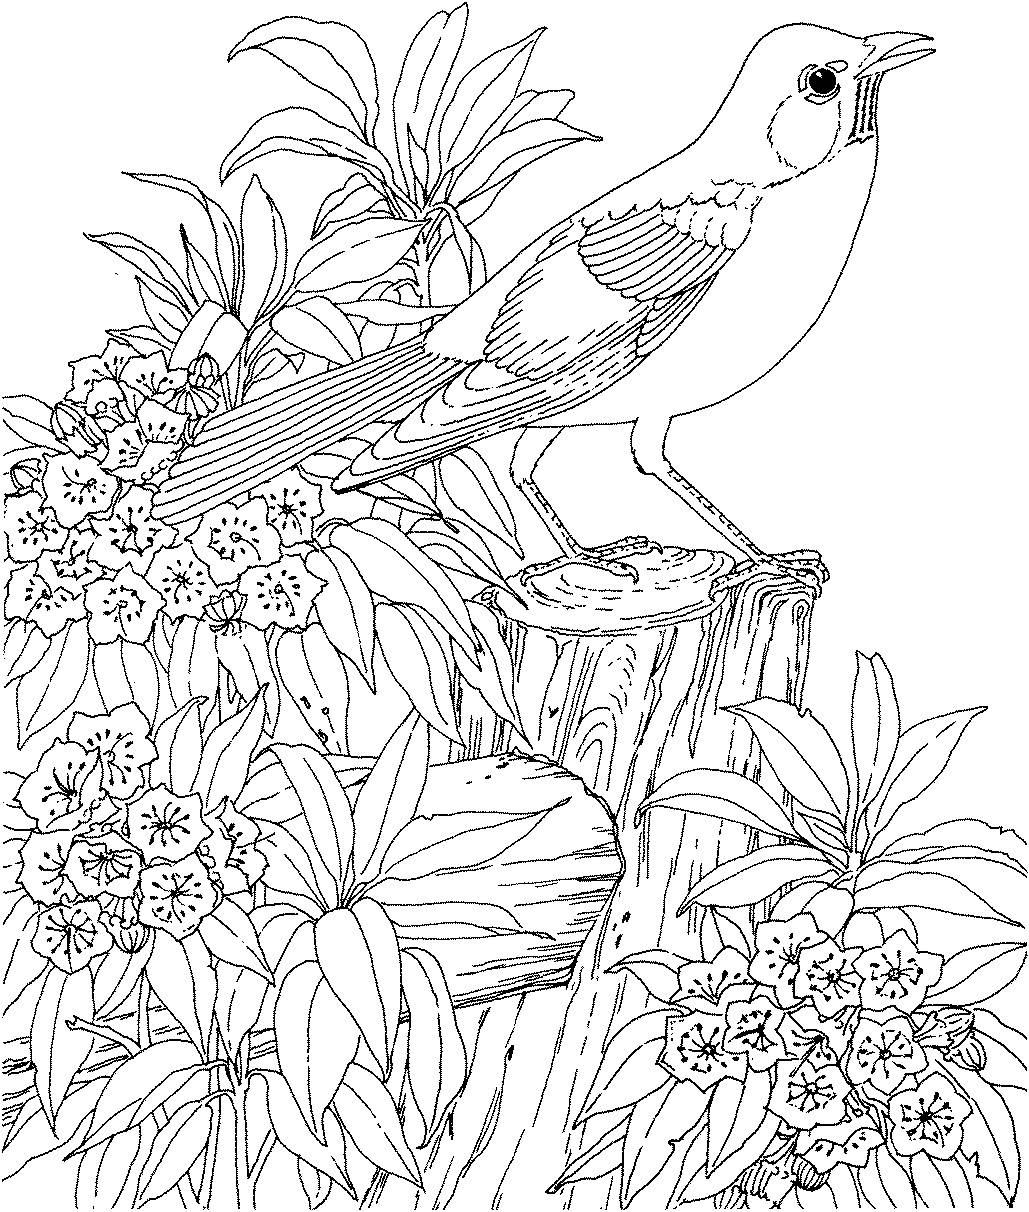 Coloring Pages Of Animals Hard Coloring Pages Of Animals Hard At Getdrawings Free For